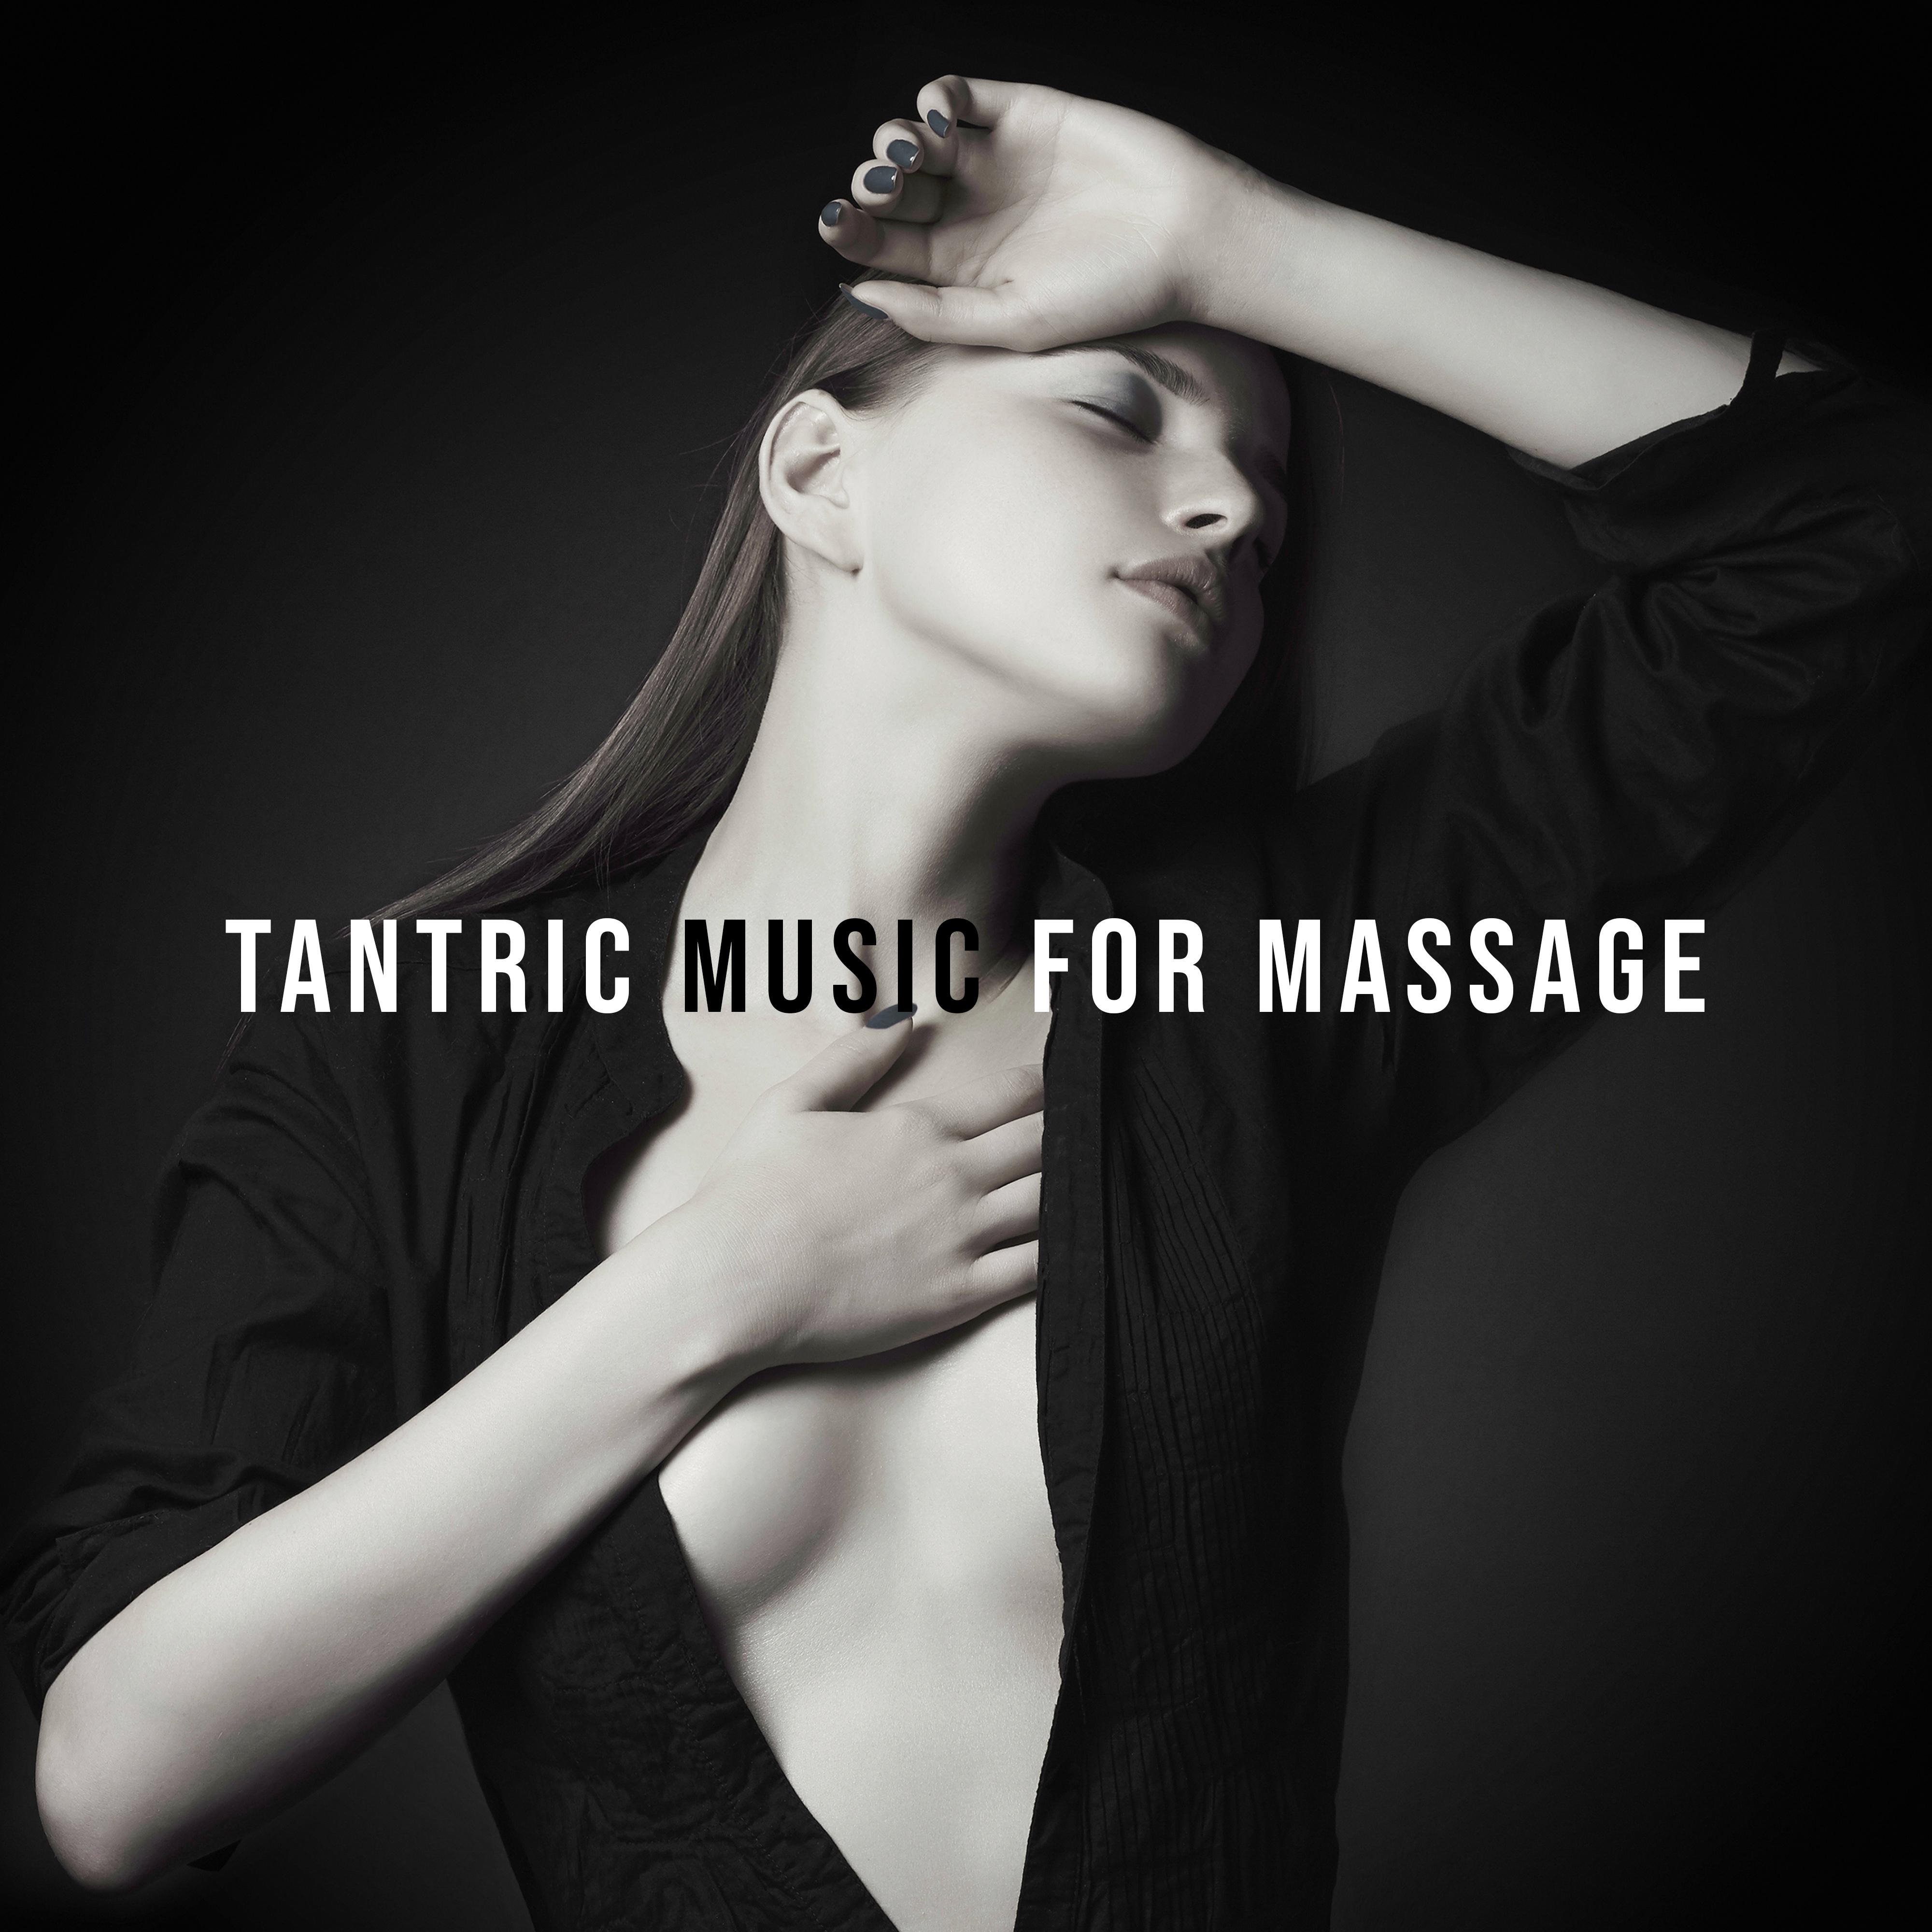 Tantric Music for Massage  Erotic Kamasutra, Pure Pleasure,  Chillout for Making Love, Sensual Massage, Chill Out 2019